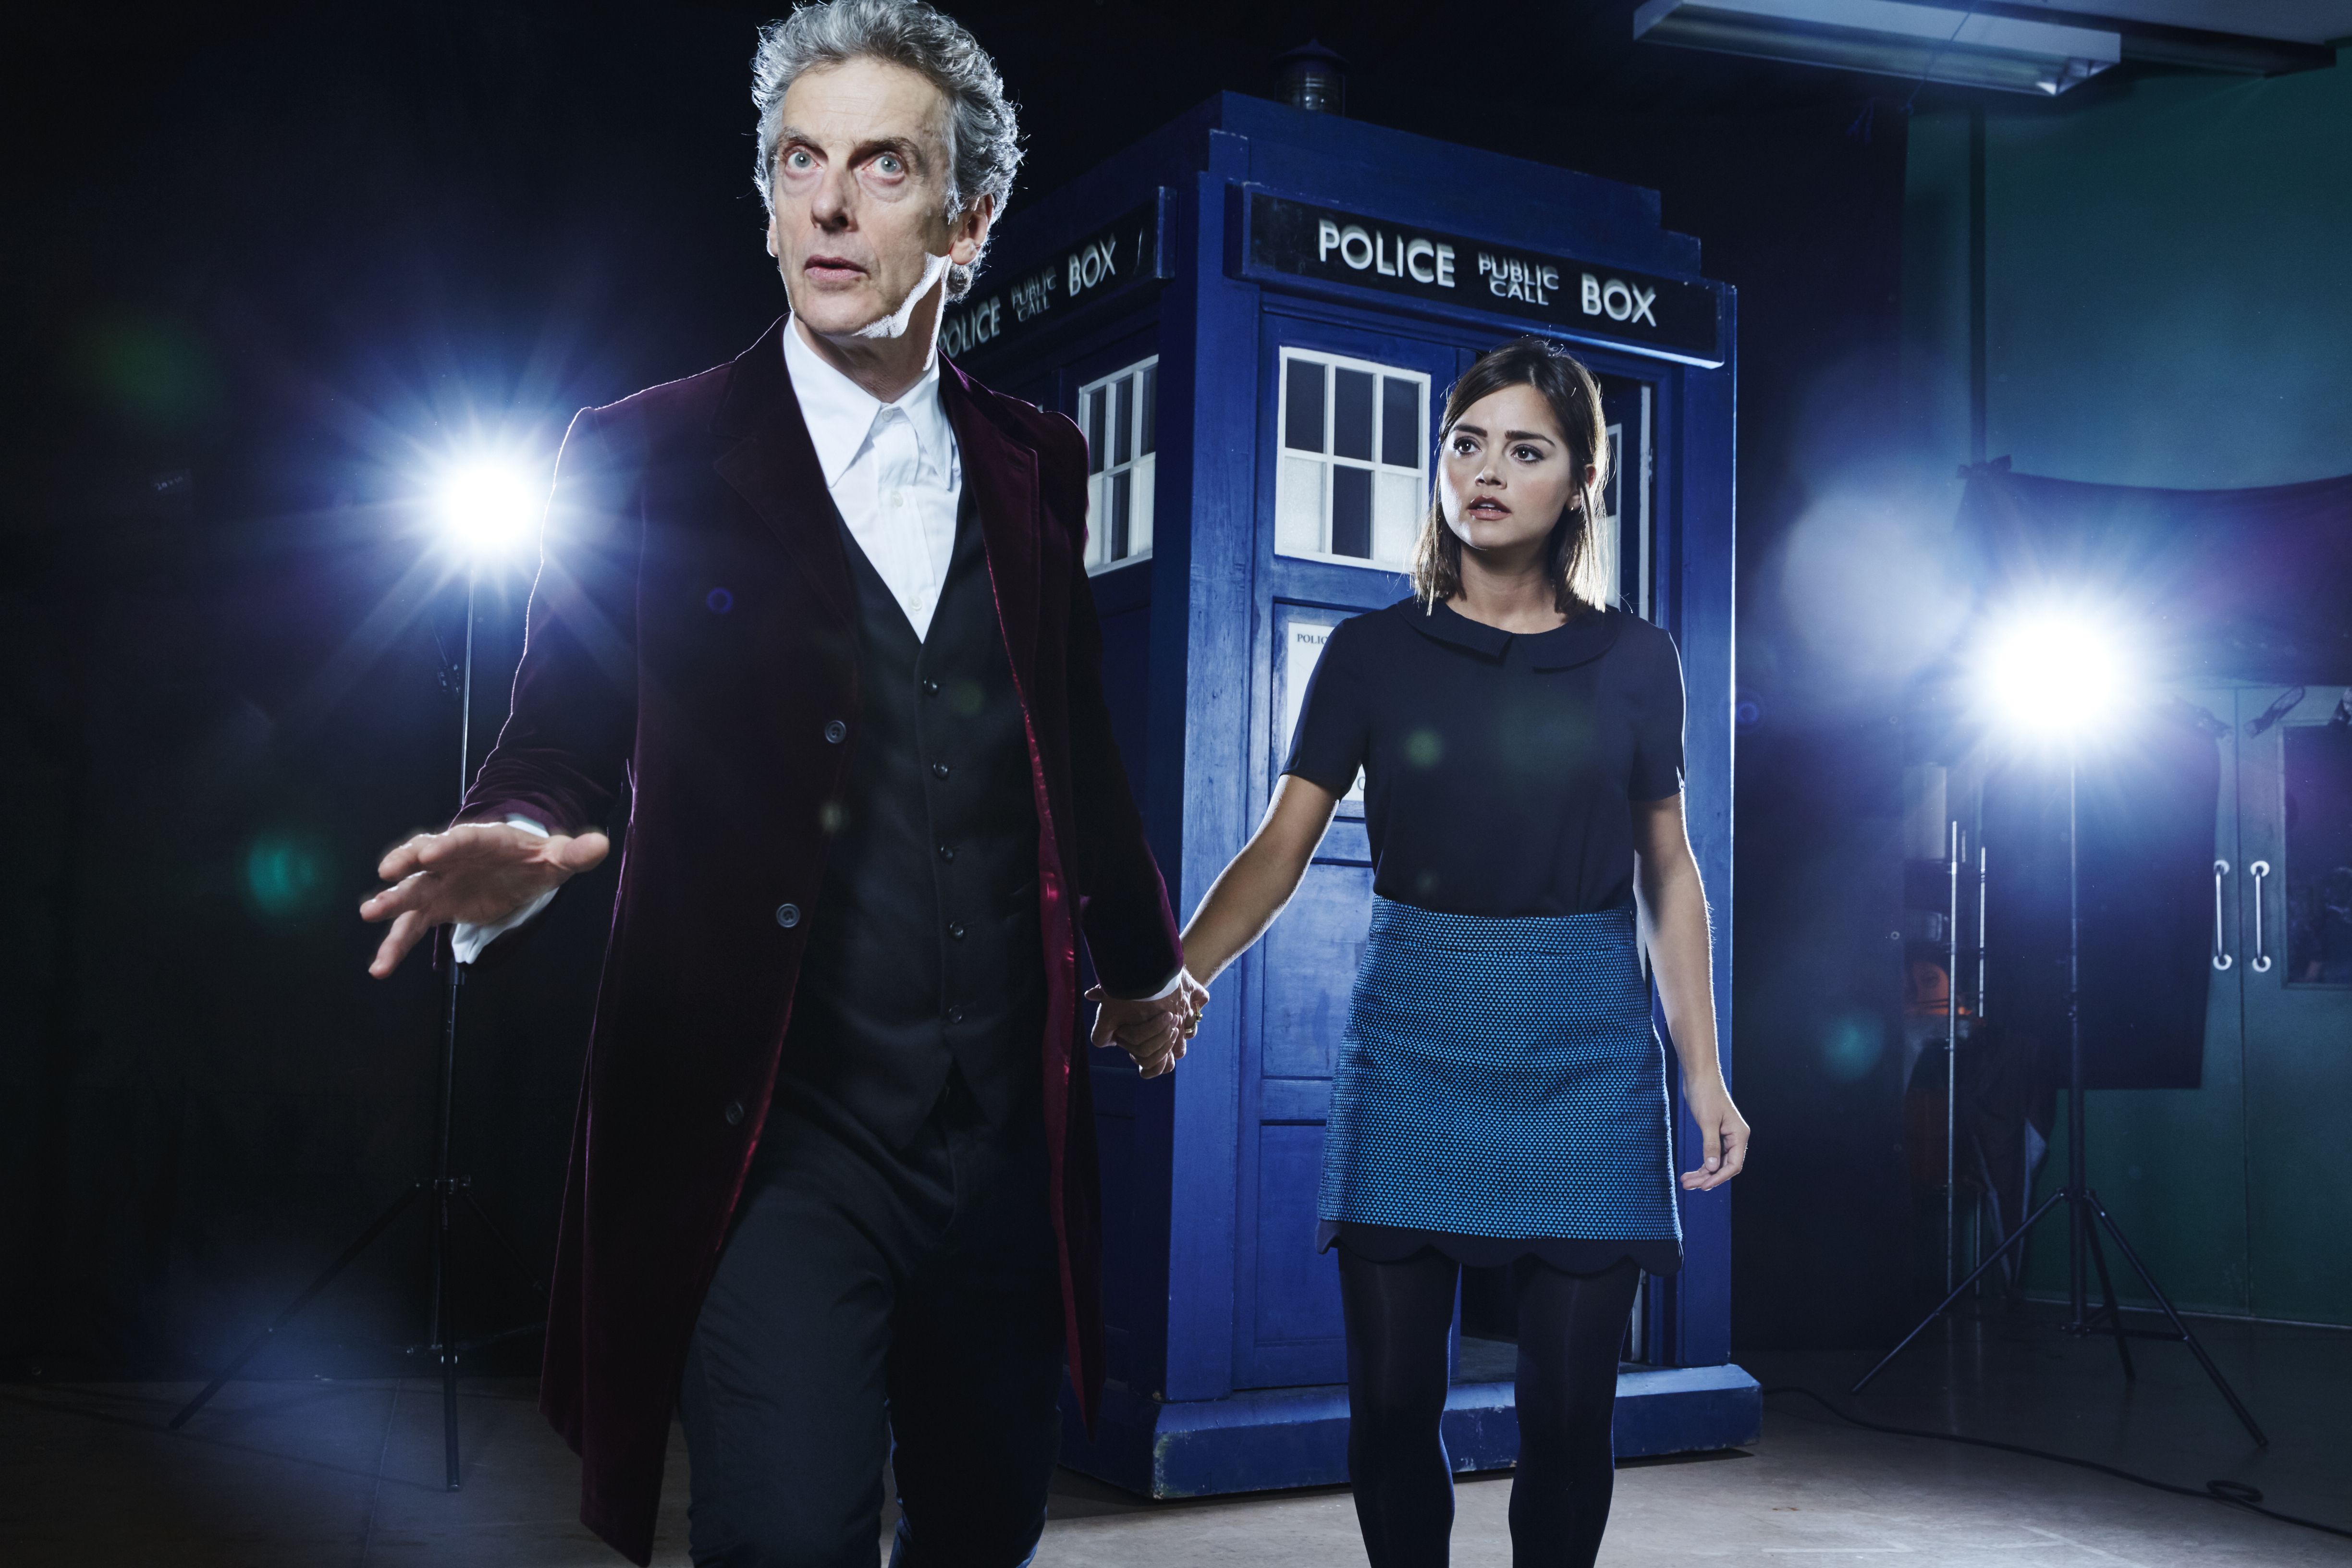 Free download doctor who doctor who twelfth doctor twelfth doctor peter capaldi [1680x1050] for your Desktop, Mobile & Tablet. Explore Doctor Who Wallpaper Peter Capaldi. Doctor Who 12th Doctor Wallpaper